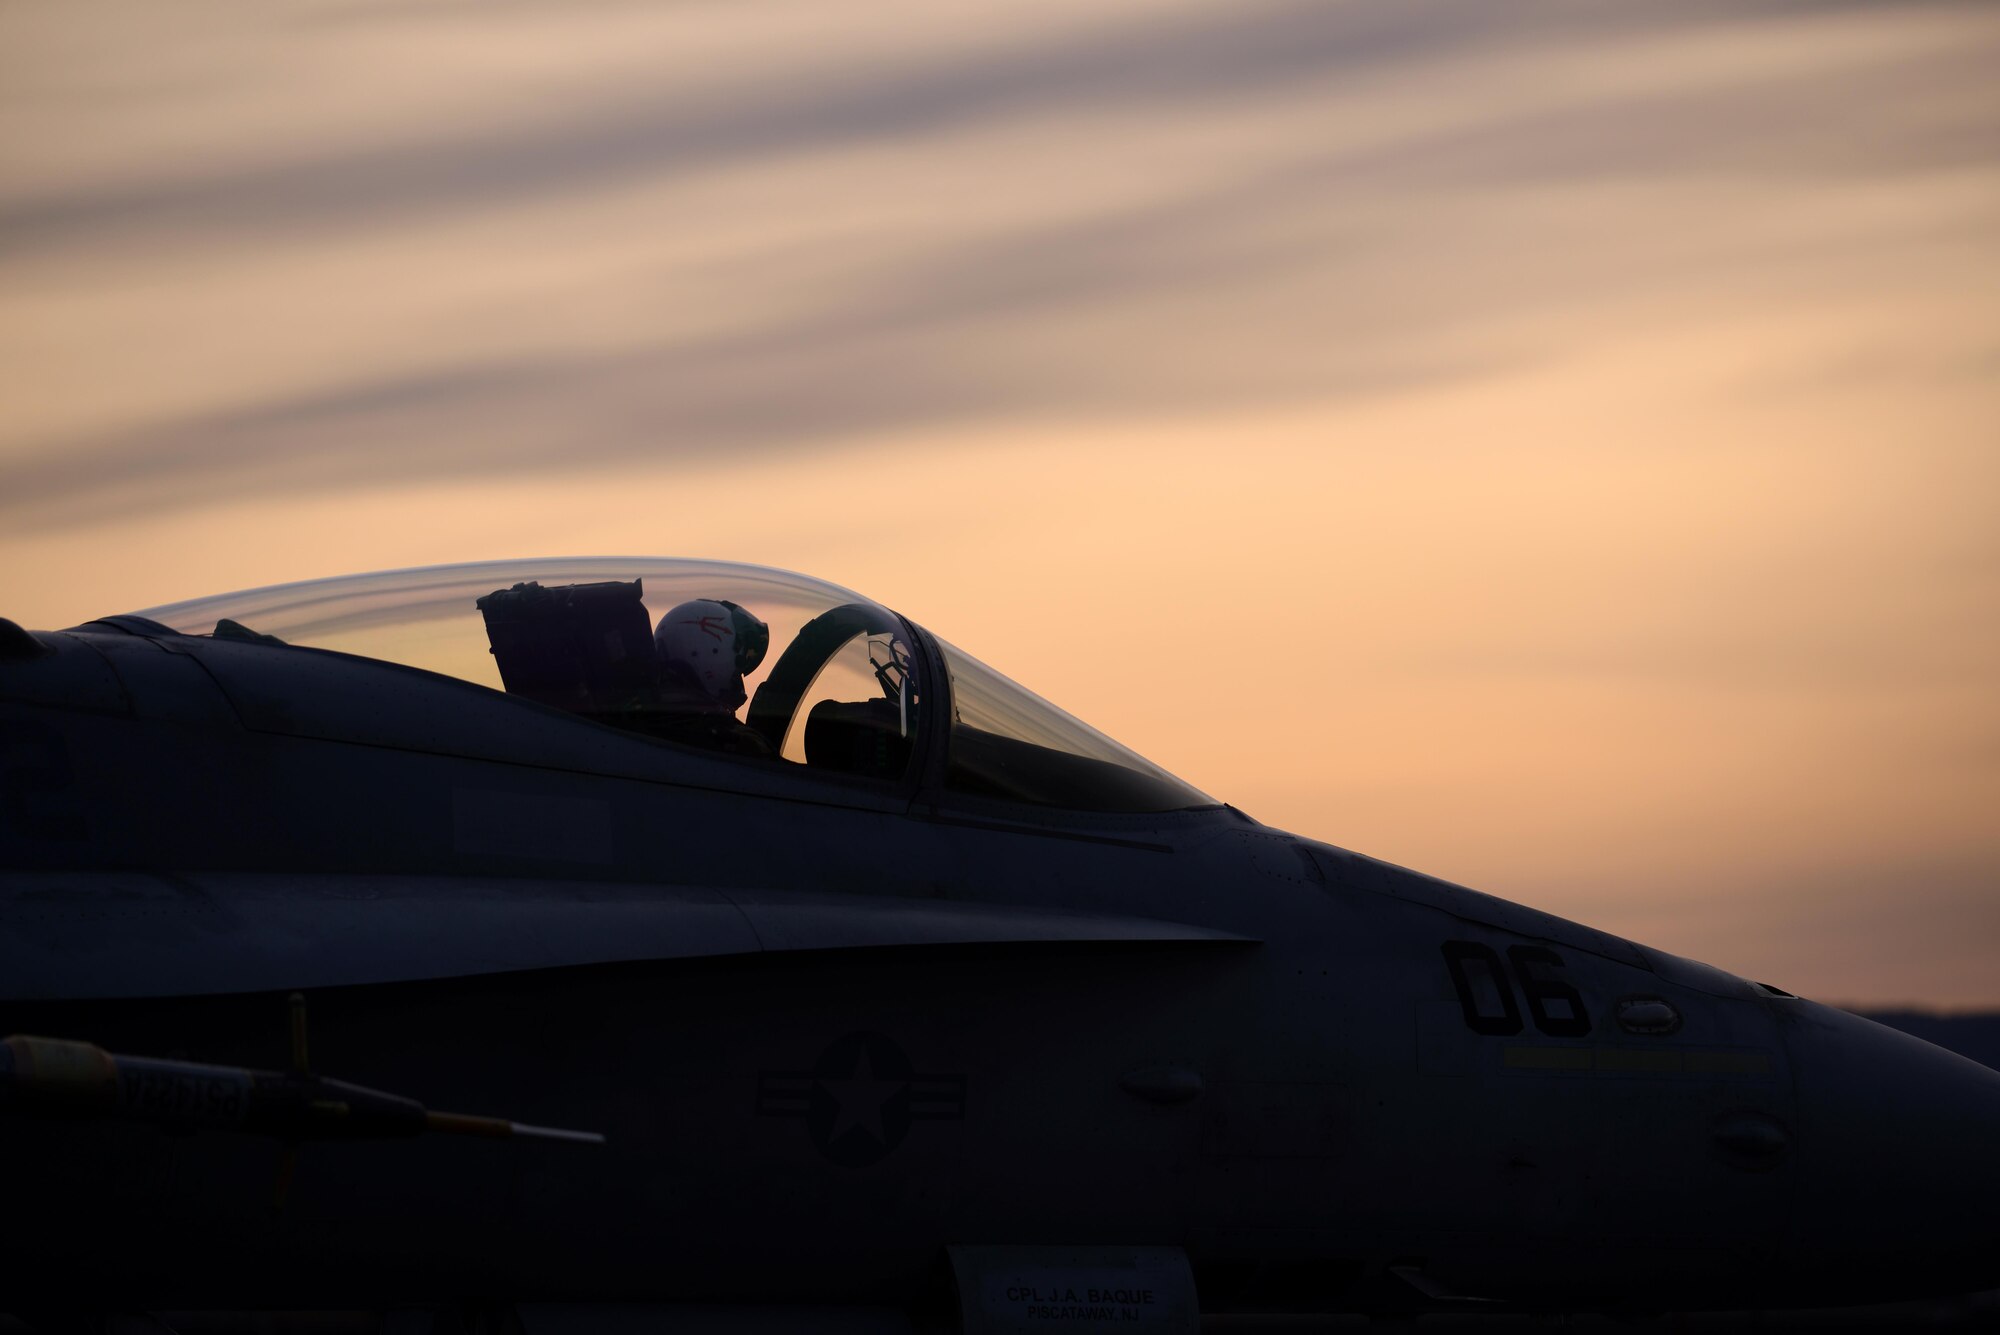 A pilot assigned to Marine Fighter Attack Squadron 232 out of Marine Corps Air Station Miramar, Calif., taxis his F/A-18C Hornet aircraft down the Eielson Air Force Base, Alaska, flight line as the sun rises Oct. 10, 2016, during RED FLAG-Alaska (RF-A) 17-1. The Joint Pacific Alaska Range Complex provides more than 67,000 square miles of realistic training environment and allows commanders to train for full spectrum engagements, ranging from individual skills to complex, large-scale joint engagements. (U.S. Air Force photo by Master Sgt. Karen J. Tomasik)